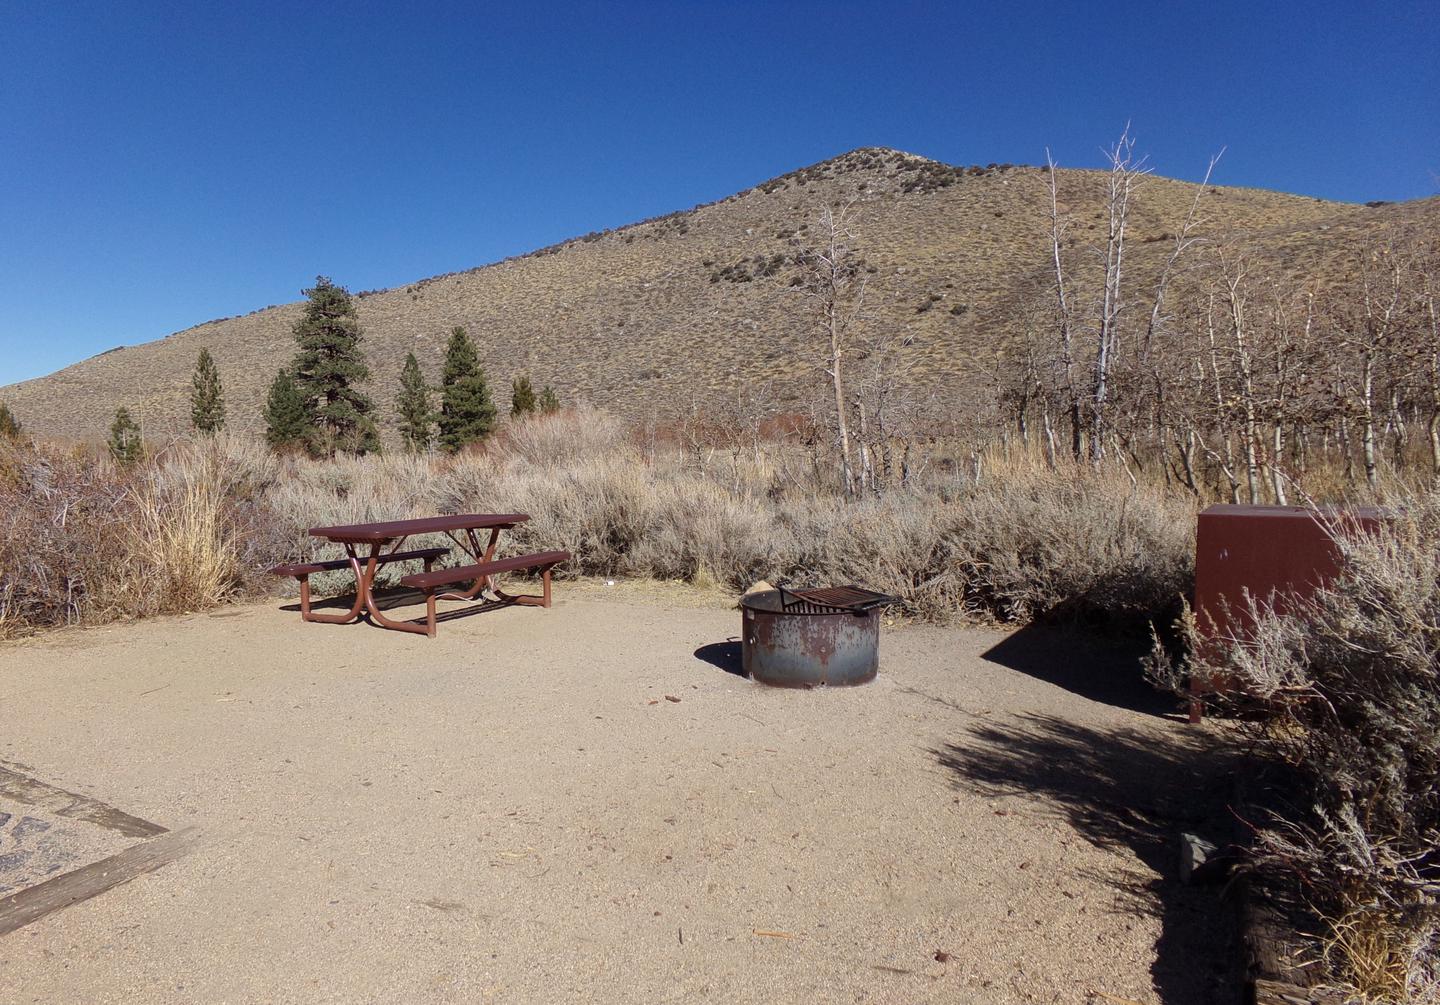 Convict Lake Campground site #75 featuring full campsite view backing up to mountain. Convict Lake Campground site #75 featuring full campsite view backing up to mountain. Picnic table, fire pit, and bear resistant food storage provided.
